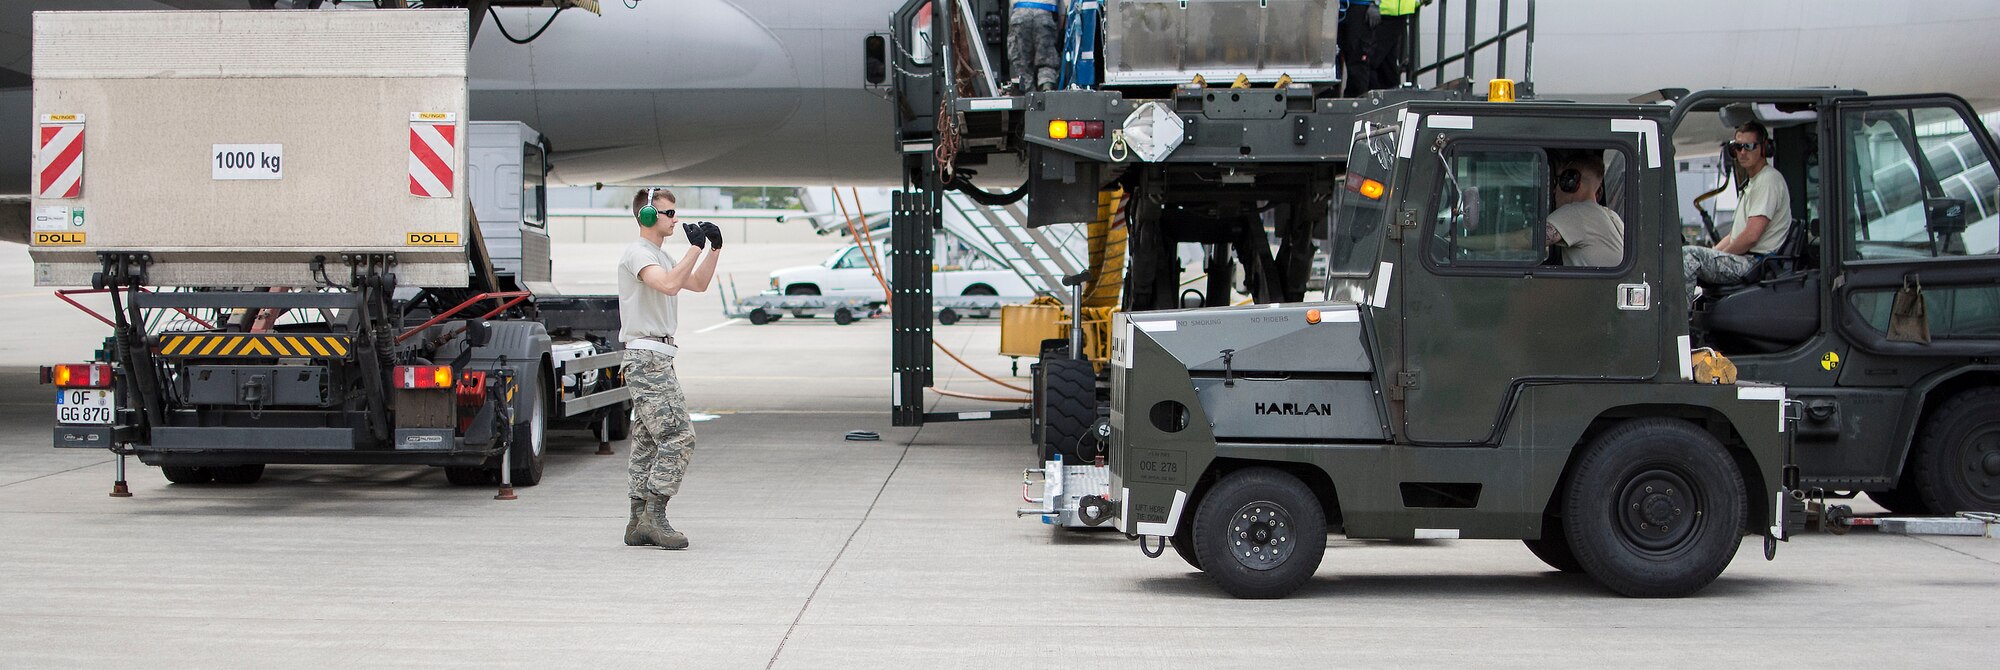 Airman 1st Class Patrick J. Lokhaiser, an air transportation specialist with 32nd Aerial Port Squadron, spots a warehouse tug on the flight line at Ramstein Air Base, Germany, May 6, 2015. Spotting ensures the safe completion of the aerial port mission. (U.S. Air Force photo by Staff Sgt. Brandy Grace)